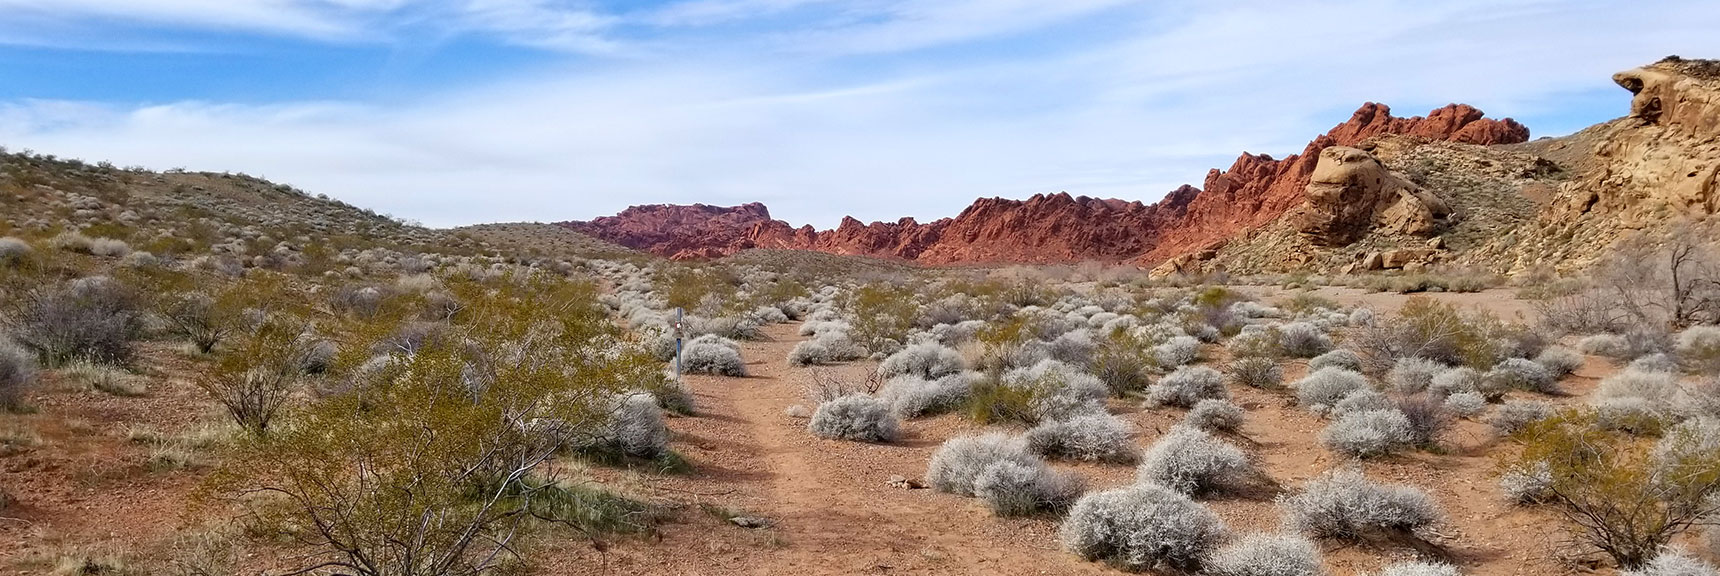 Heading Back West on the Old Arrowhead Trail in Valley of Fire State Park, Nevada